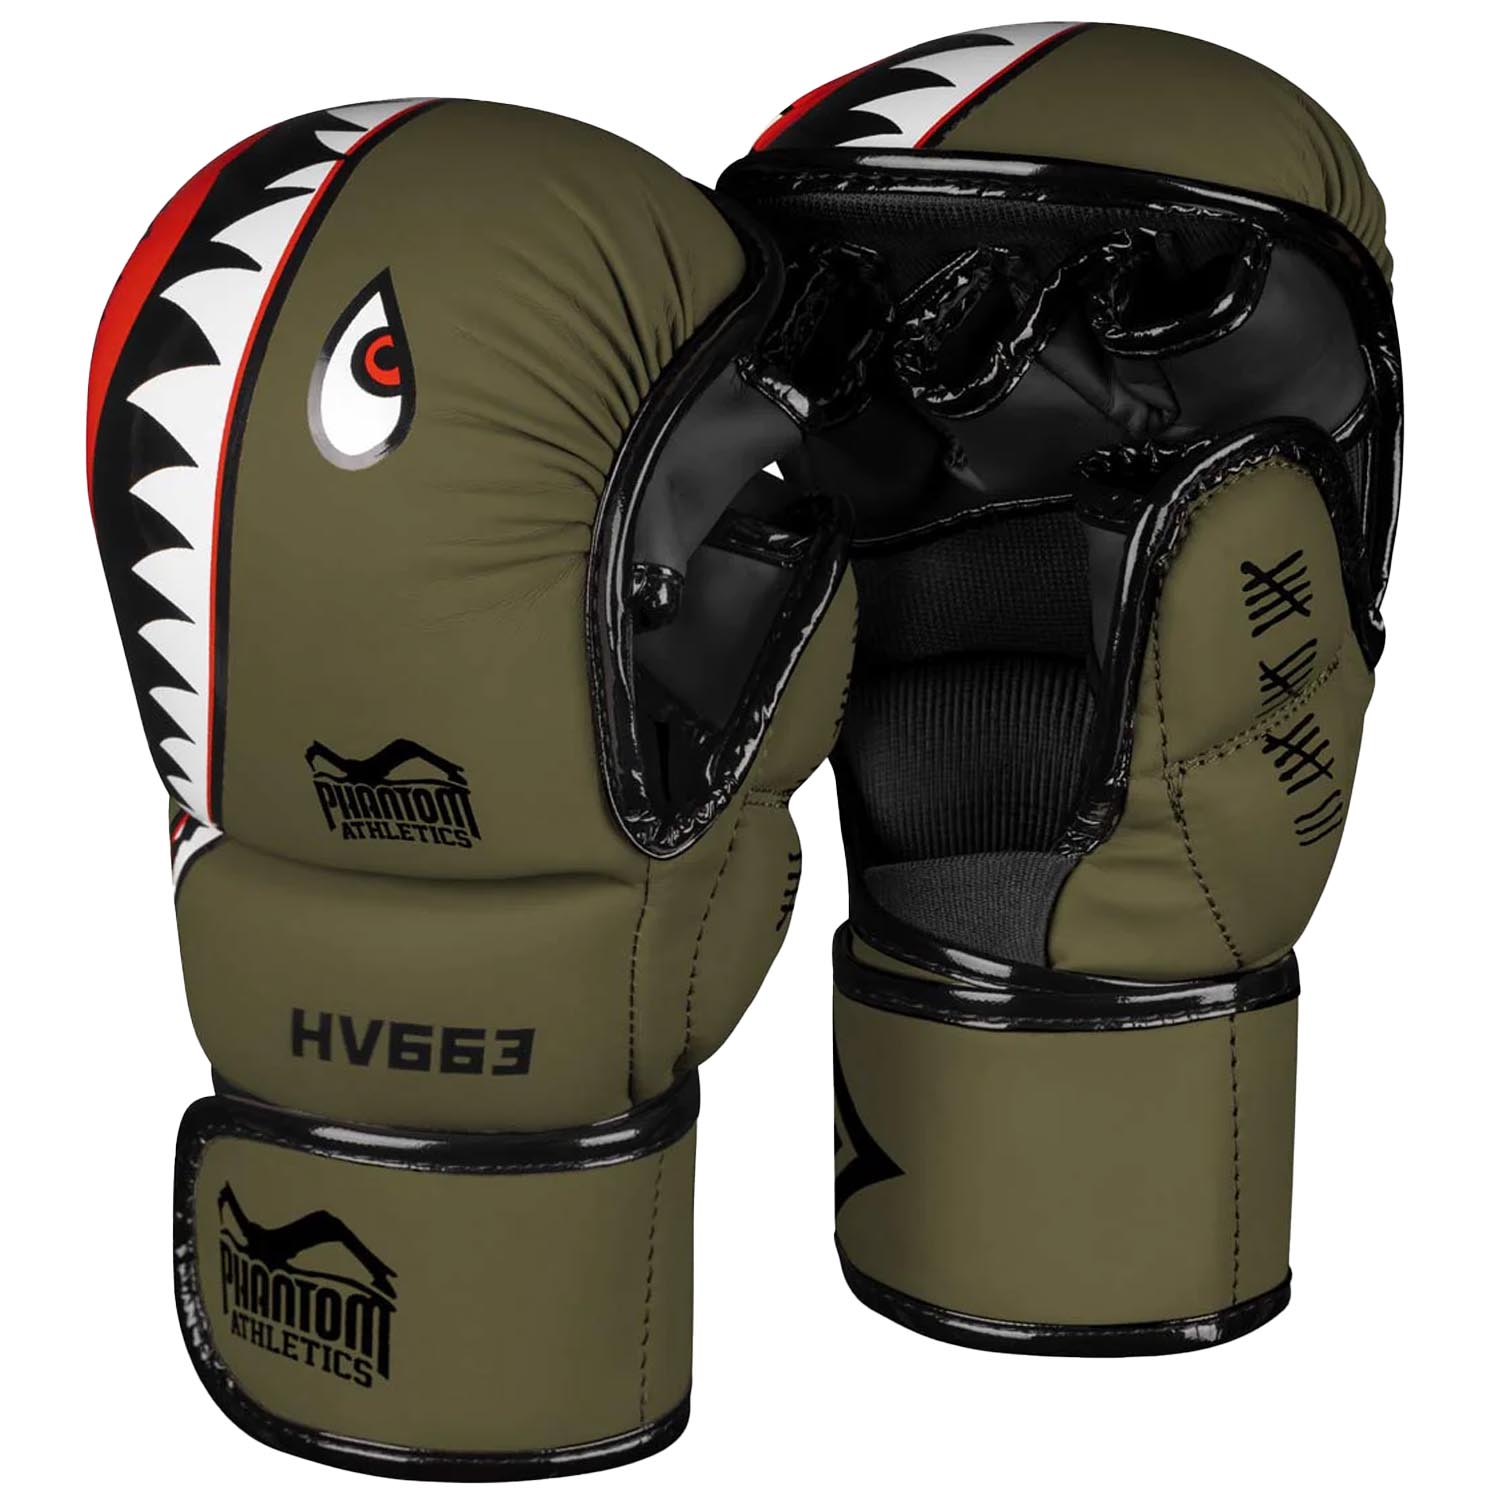 Phantom Athletics MMA Boxing Gloves, Fight Squad, Sparring, army, S/M